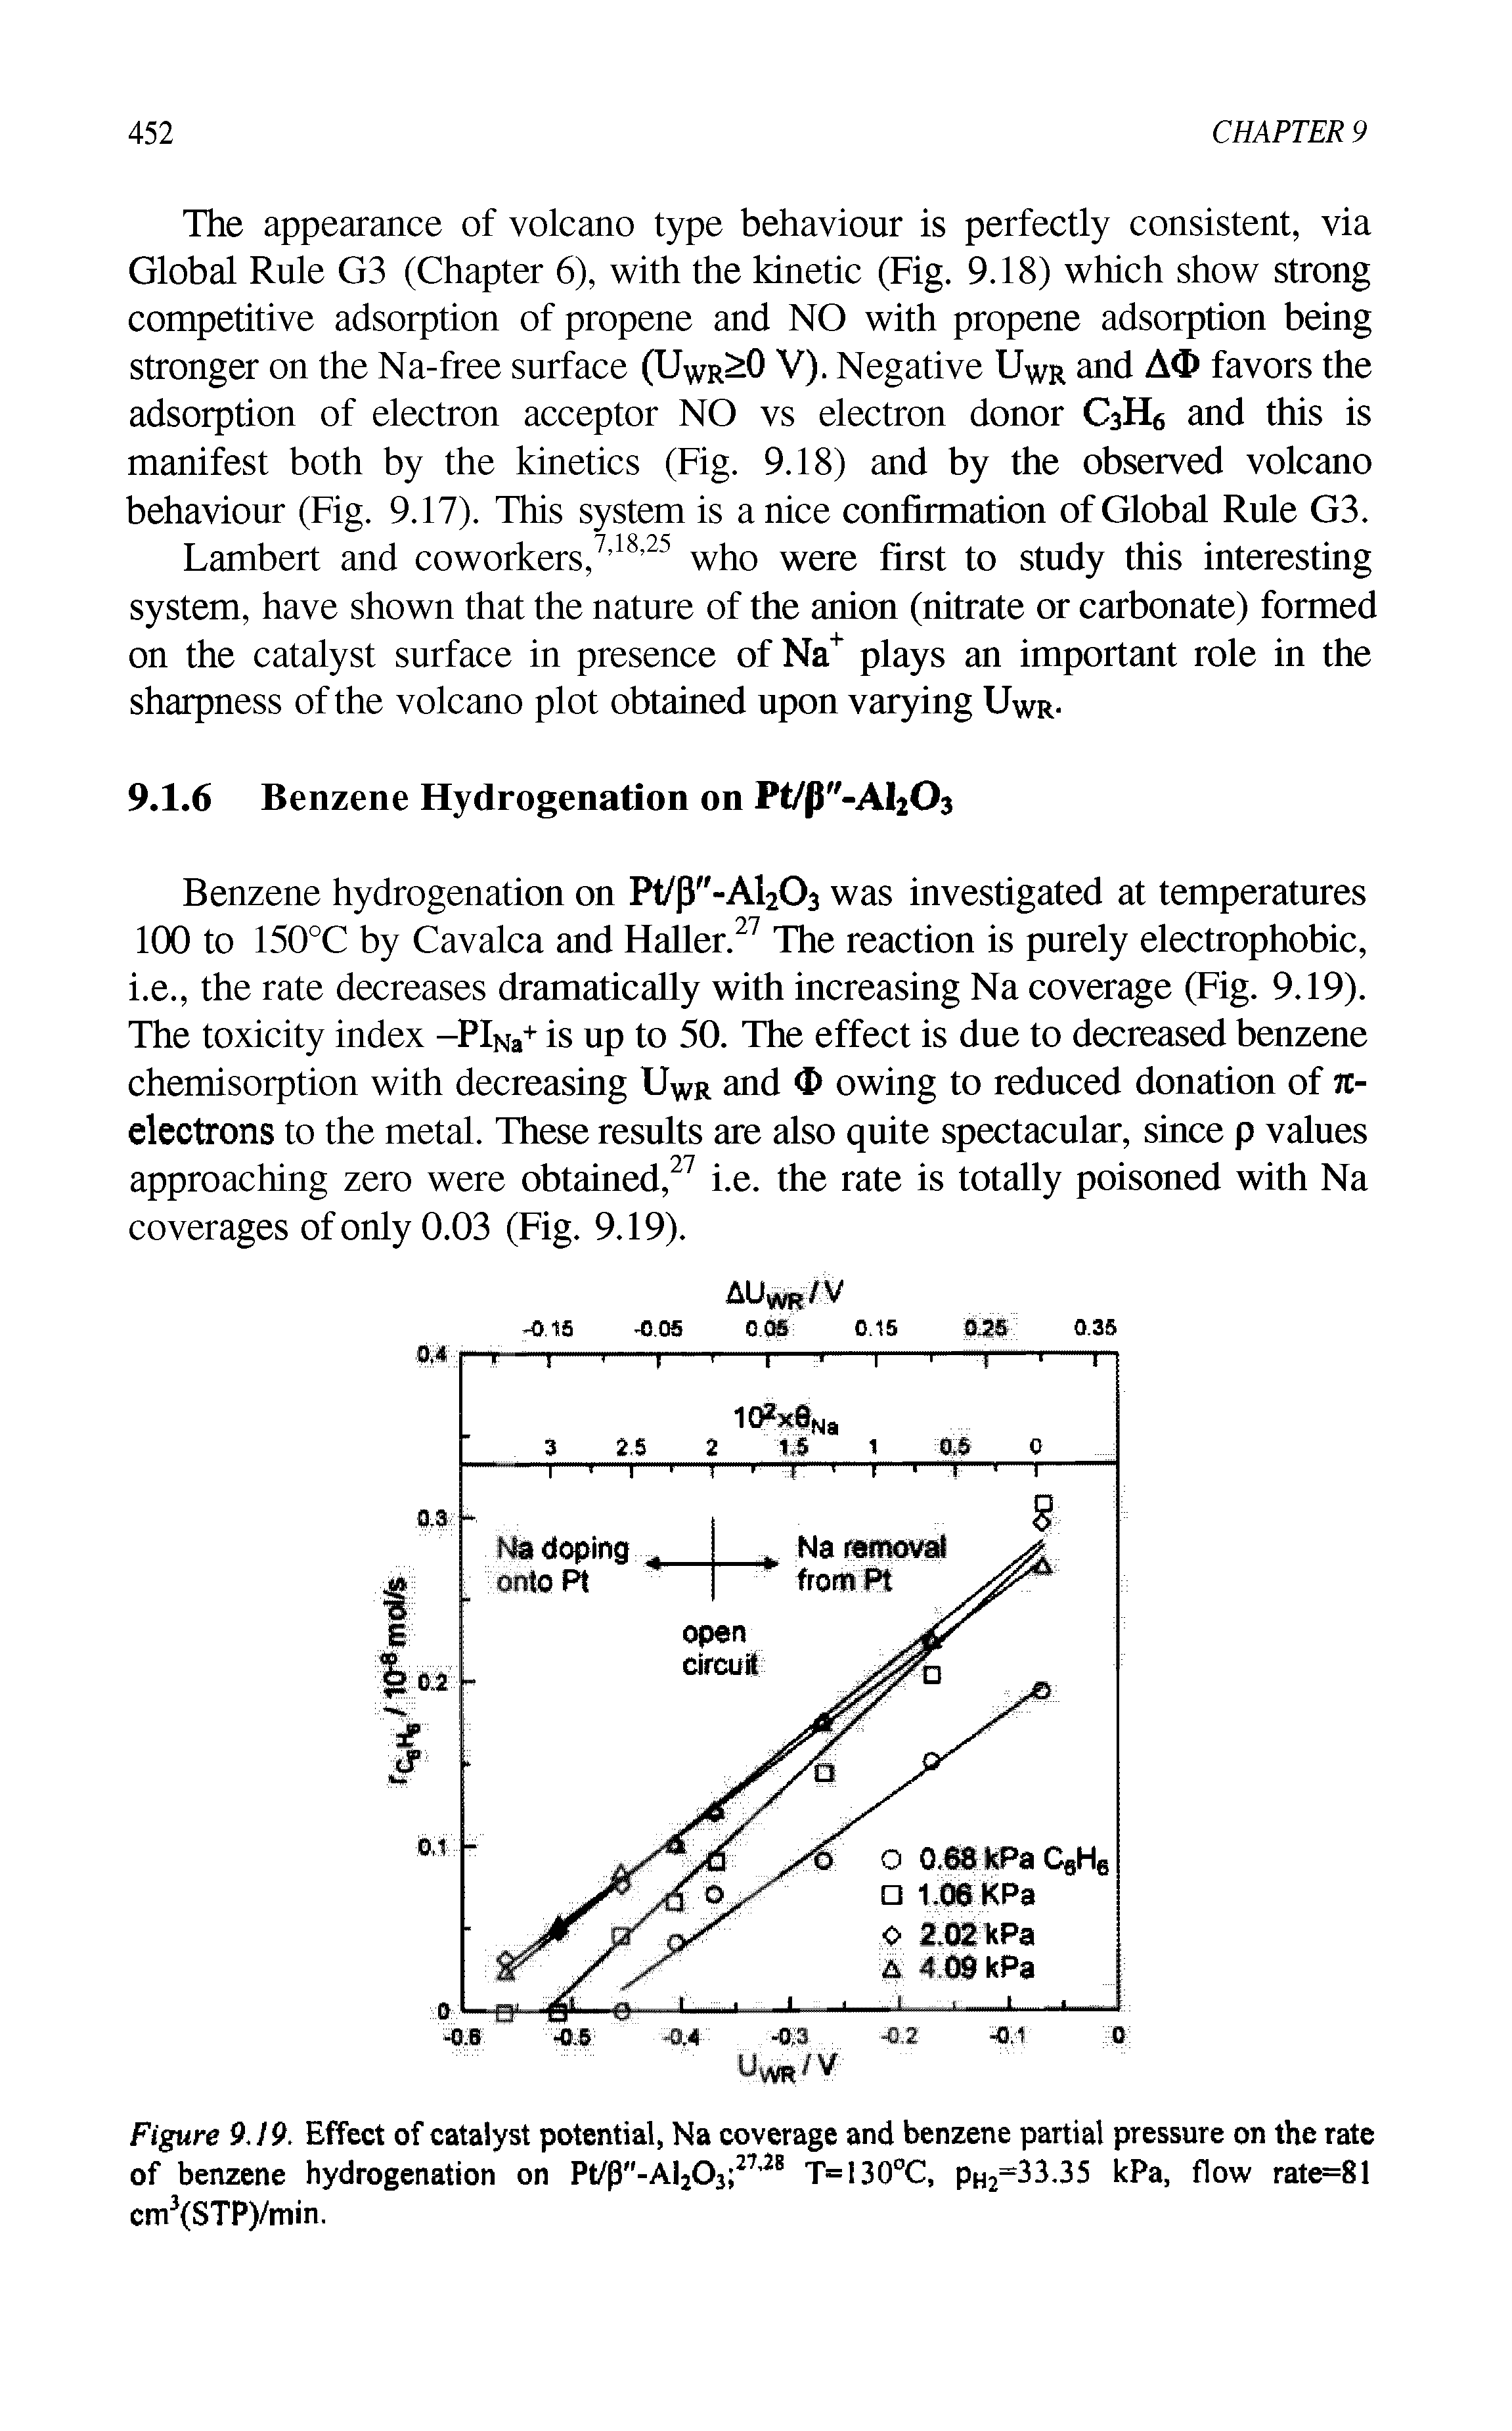 Figure 9.19. Effect of catalyst potential, Na coverage and benzene partial pressure on the rate of benzene hydrogenation on Pt/p"-Al203 27 28 T=I30°C, pH2=33.35 kPa, flow rate=81 cm3(STP)/min.